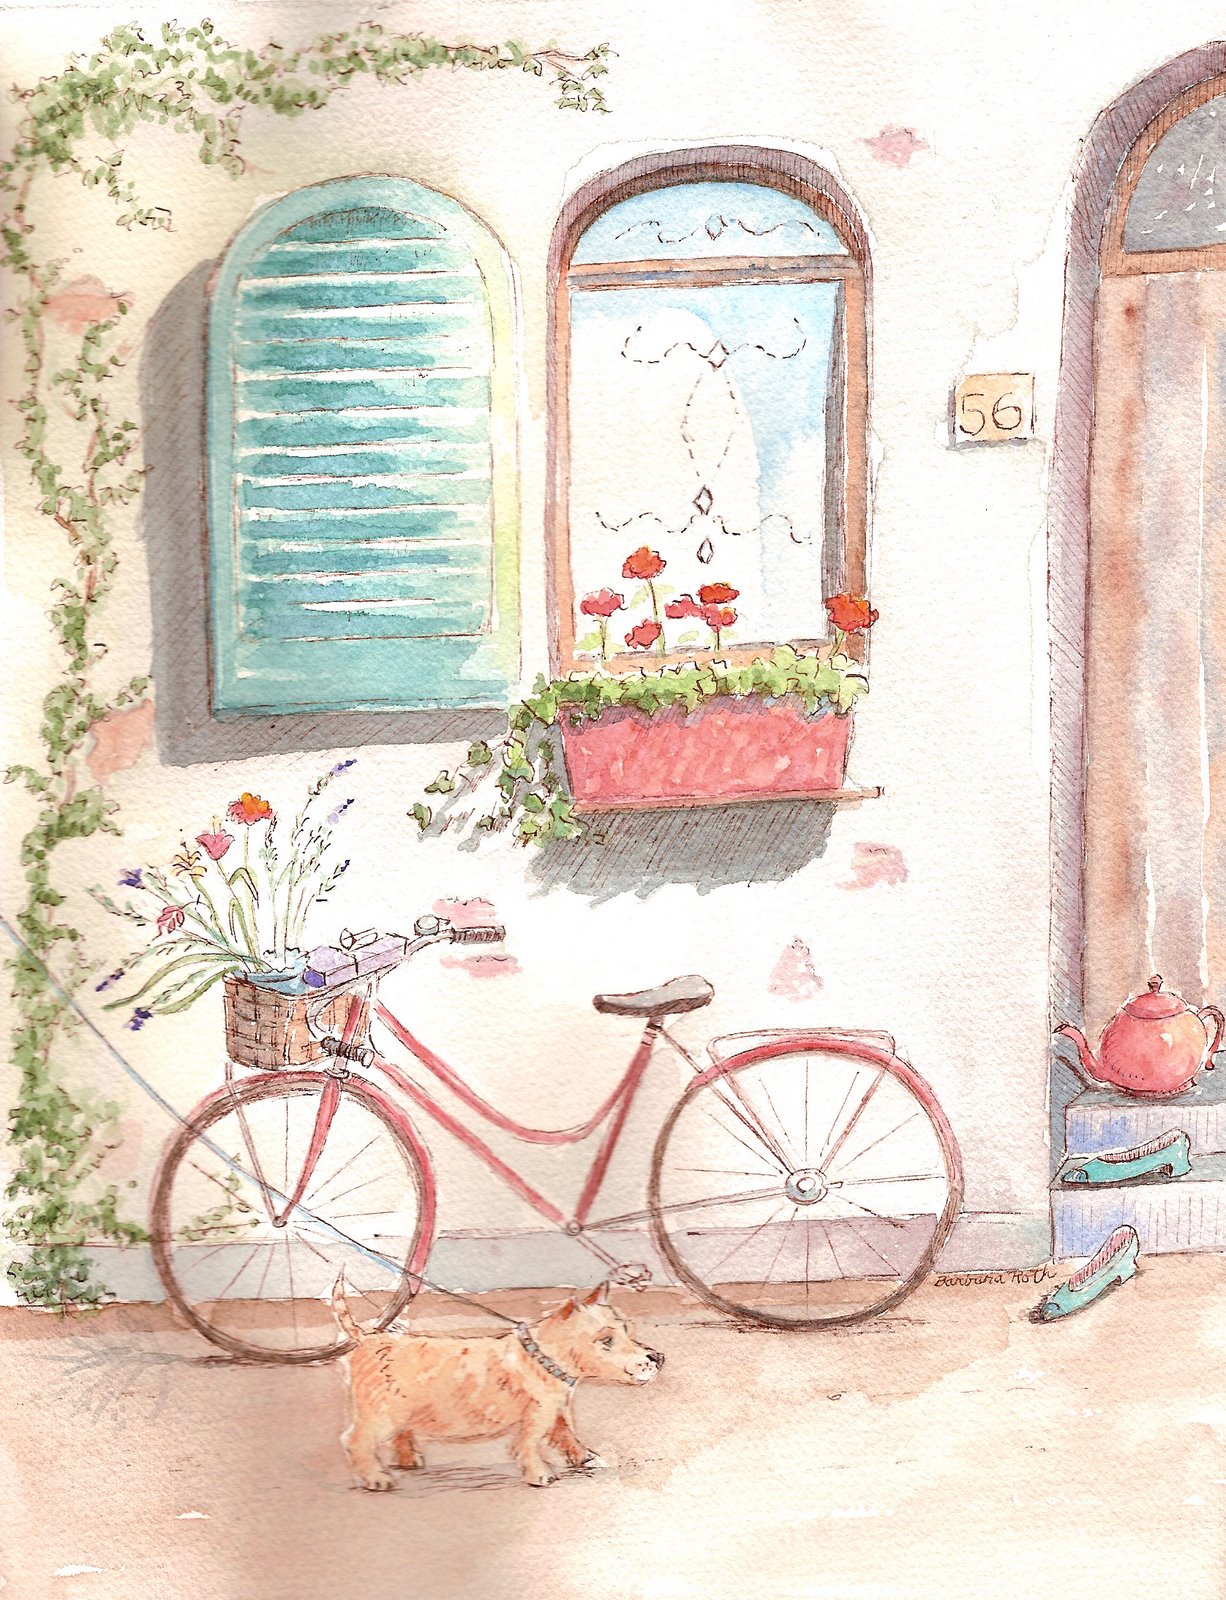 [Quaint+bicycle,+door,+shutters+and+dog+wc.jpg]